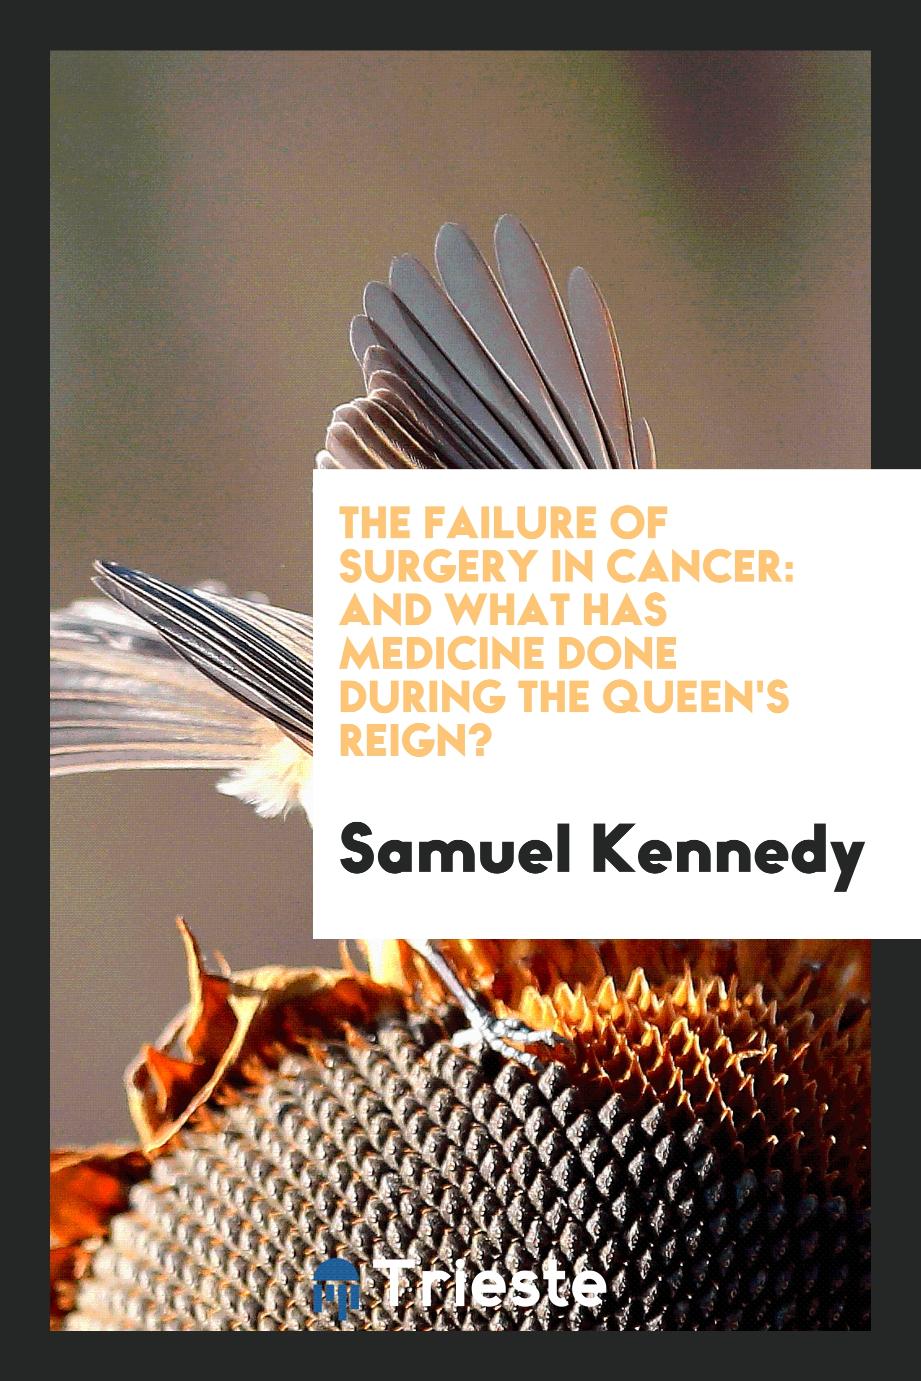 The Failure of Surgery in Cancer: And What Has Medicine Done During the Queen's Reign?